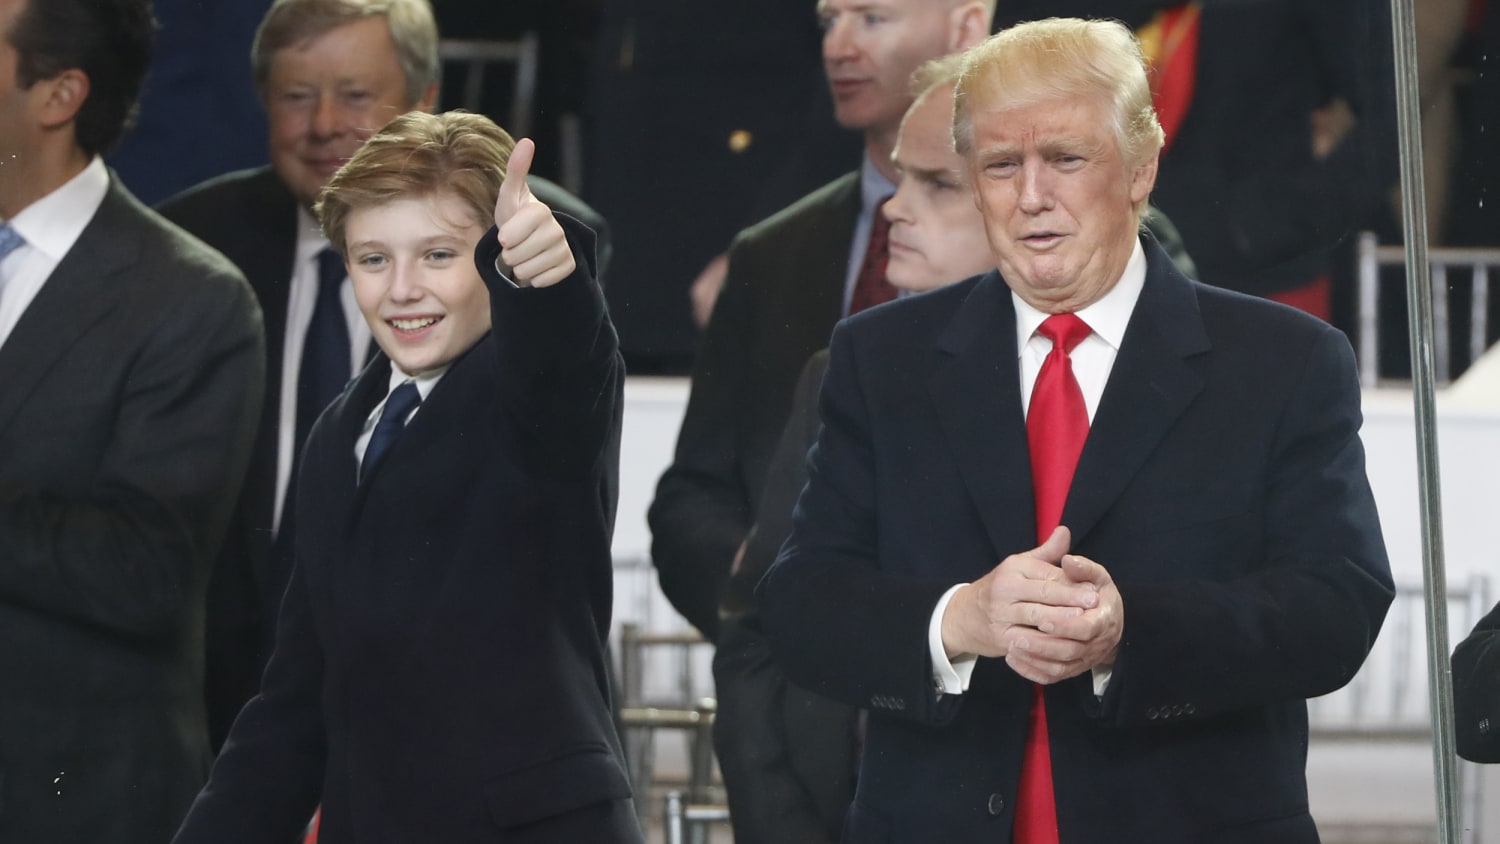 Barron Trump is first boy to live in White House in over 50 years ...